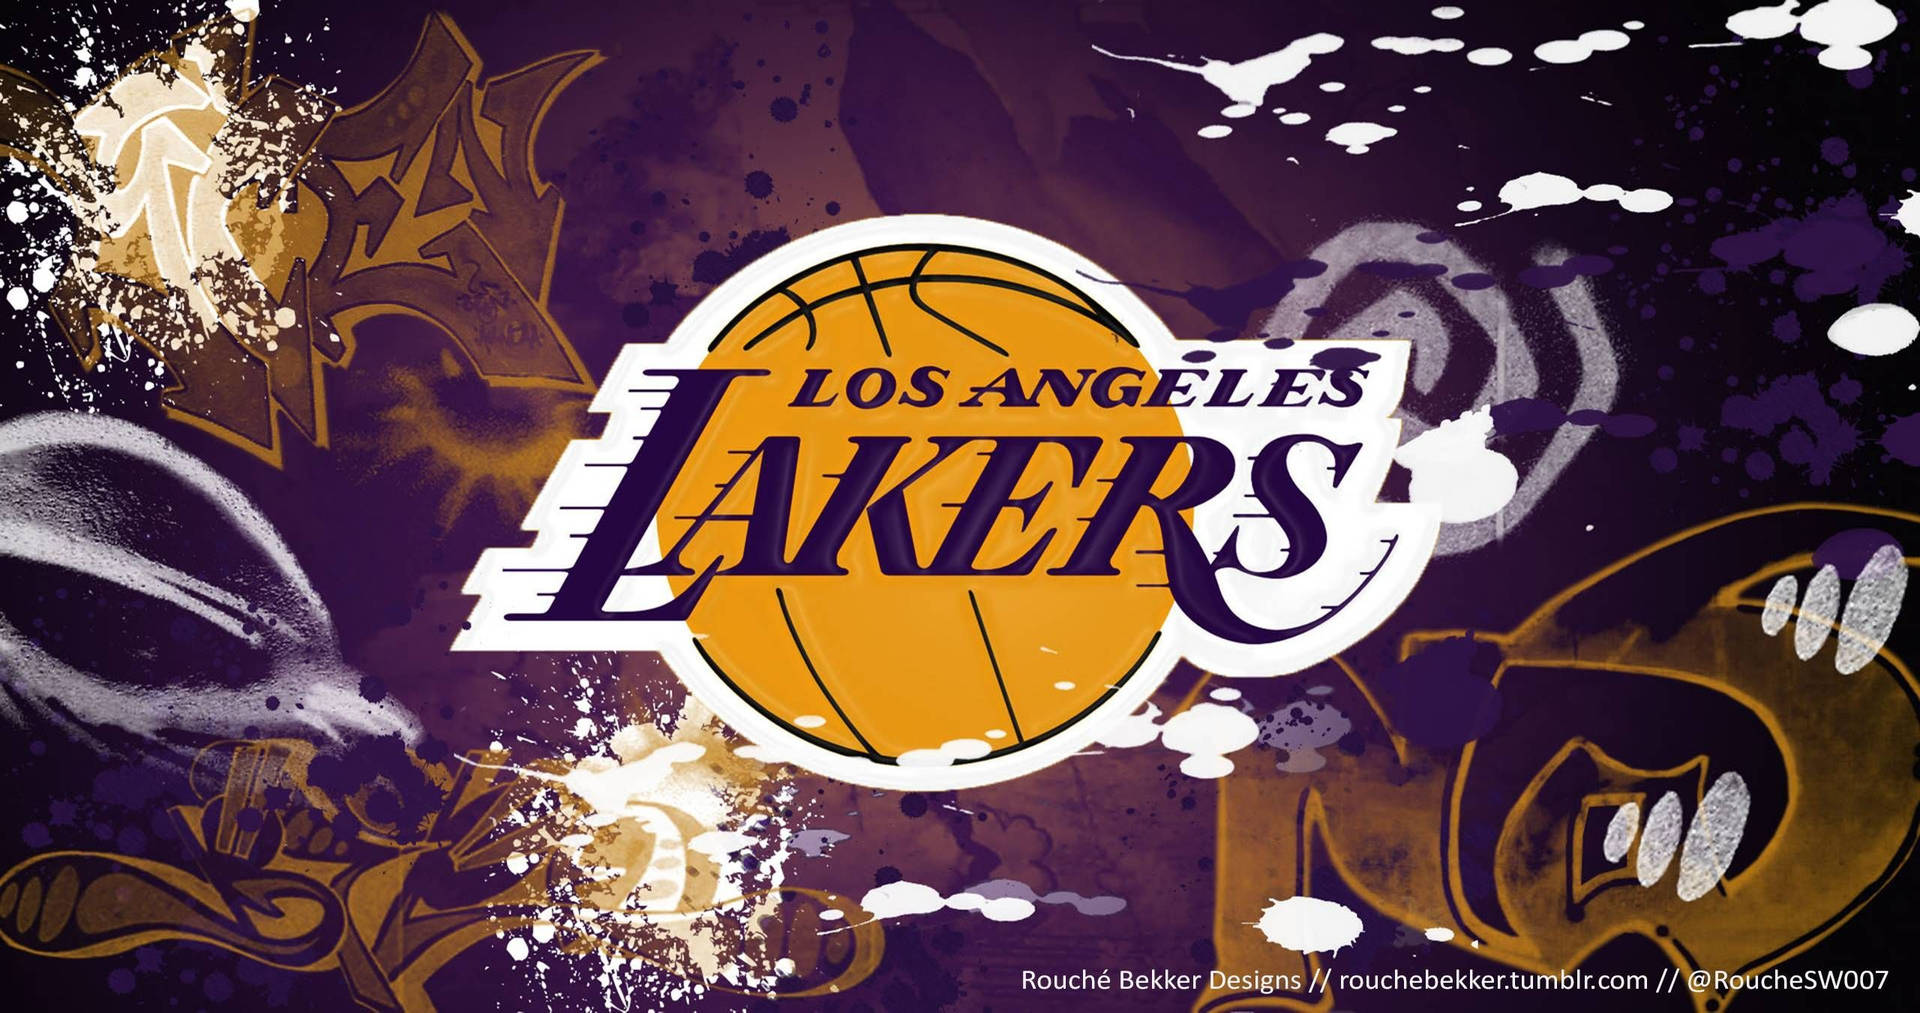 200+] Los Angeles Lakers Wallpapers